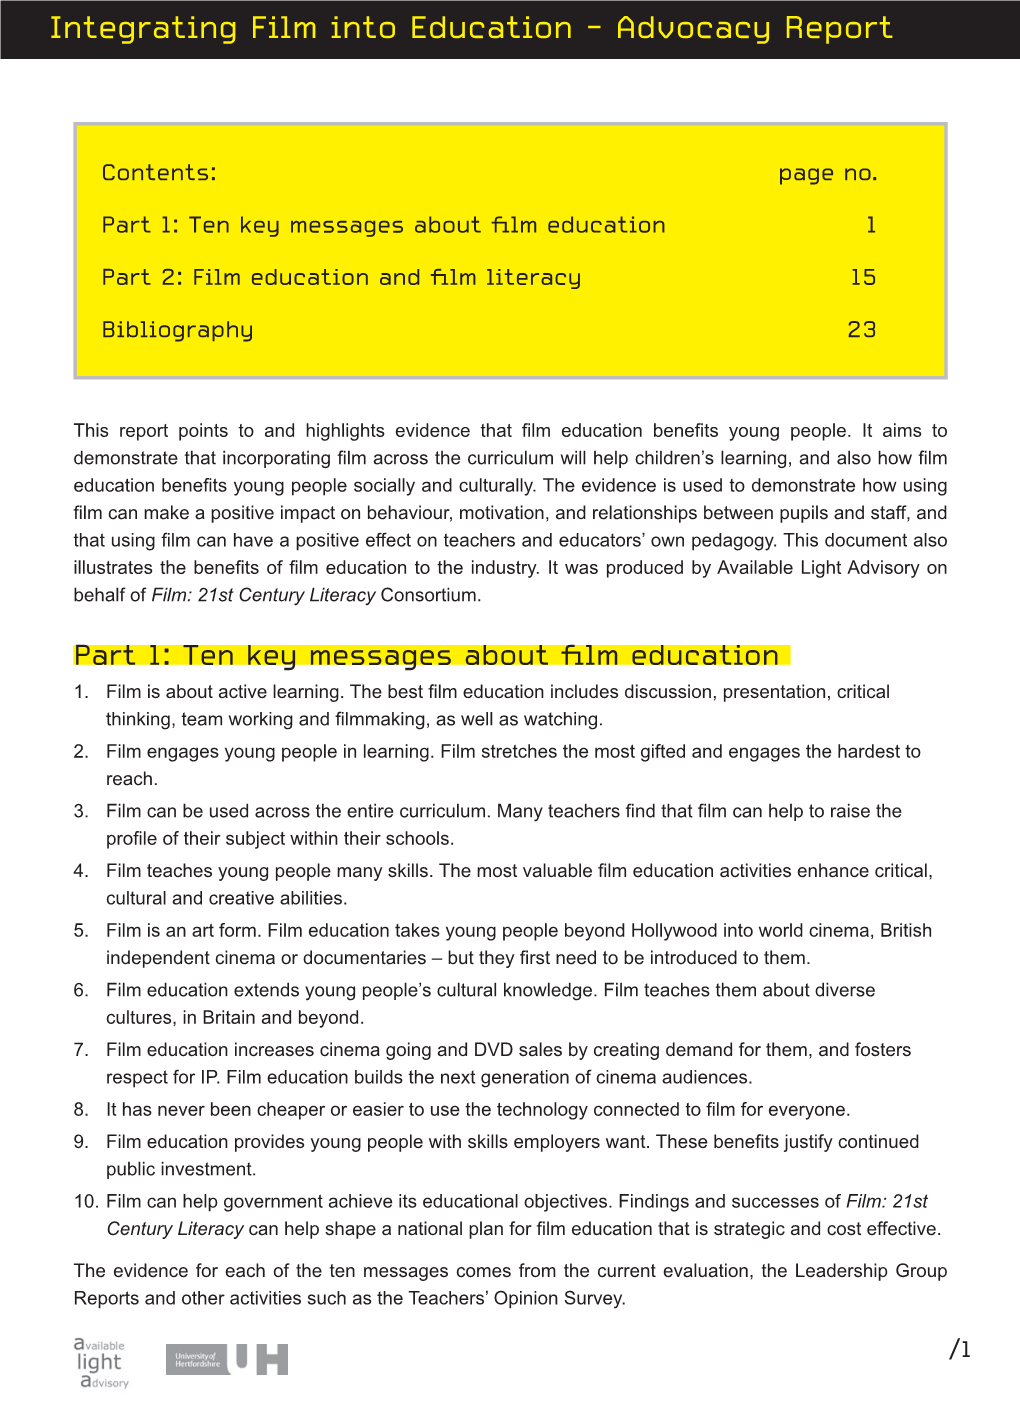 Integrating Film Into Education - Advocacy Report